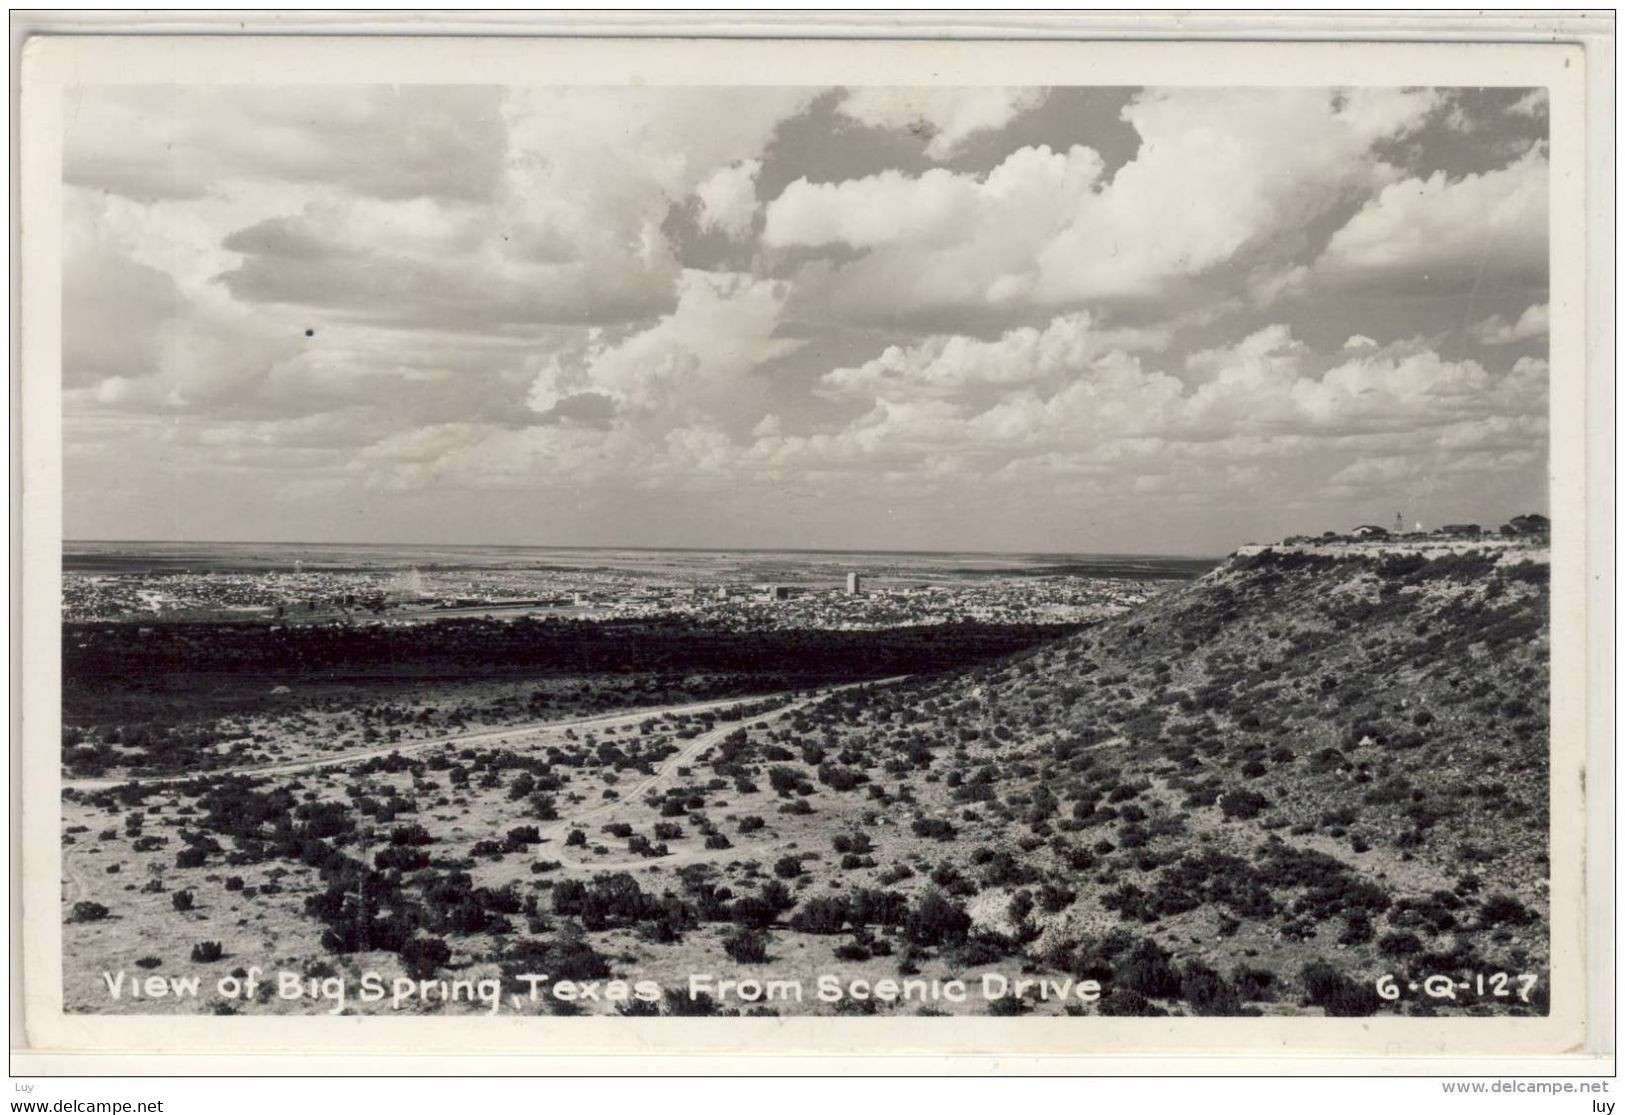 BIG SPRING TEXAS VIEW FROM SCENIC DRIVE PHOTO POST CARD 1950 - American Roadside